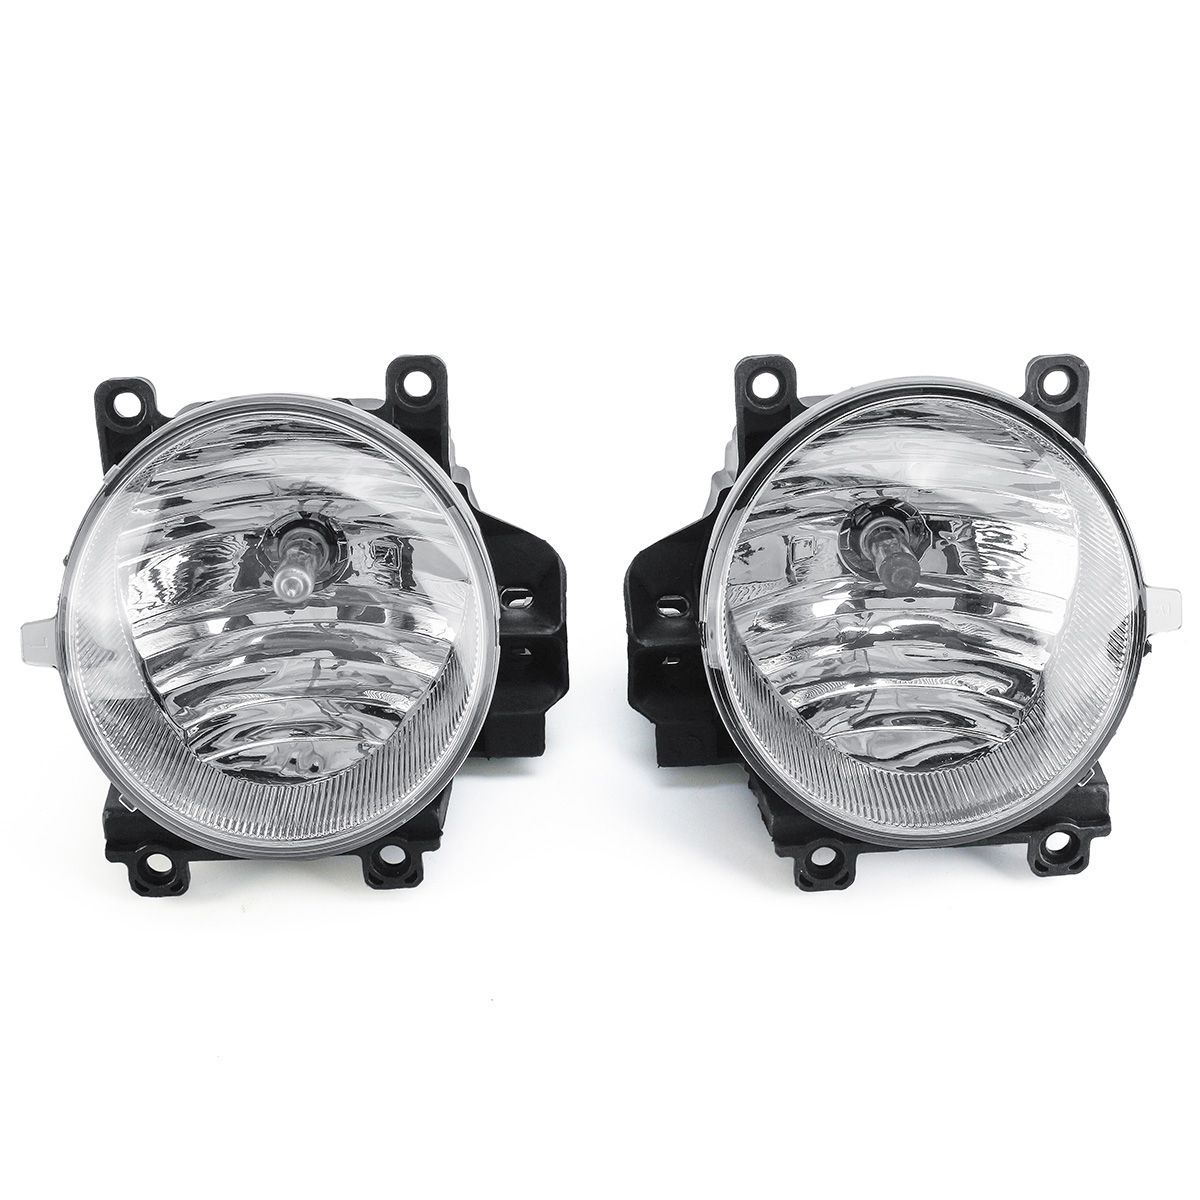 2Pcs-Car-Front-Bumper-Fog-Lights-Lamps-With-Brackets-Wiring-Harness-Kits-For-Toyota-RAV4-2013-2015-1680517